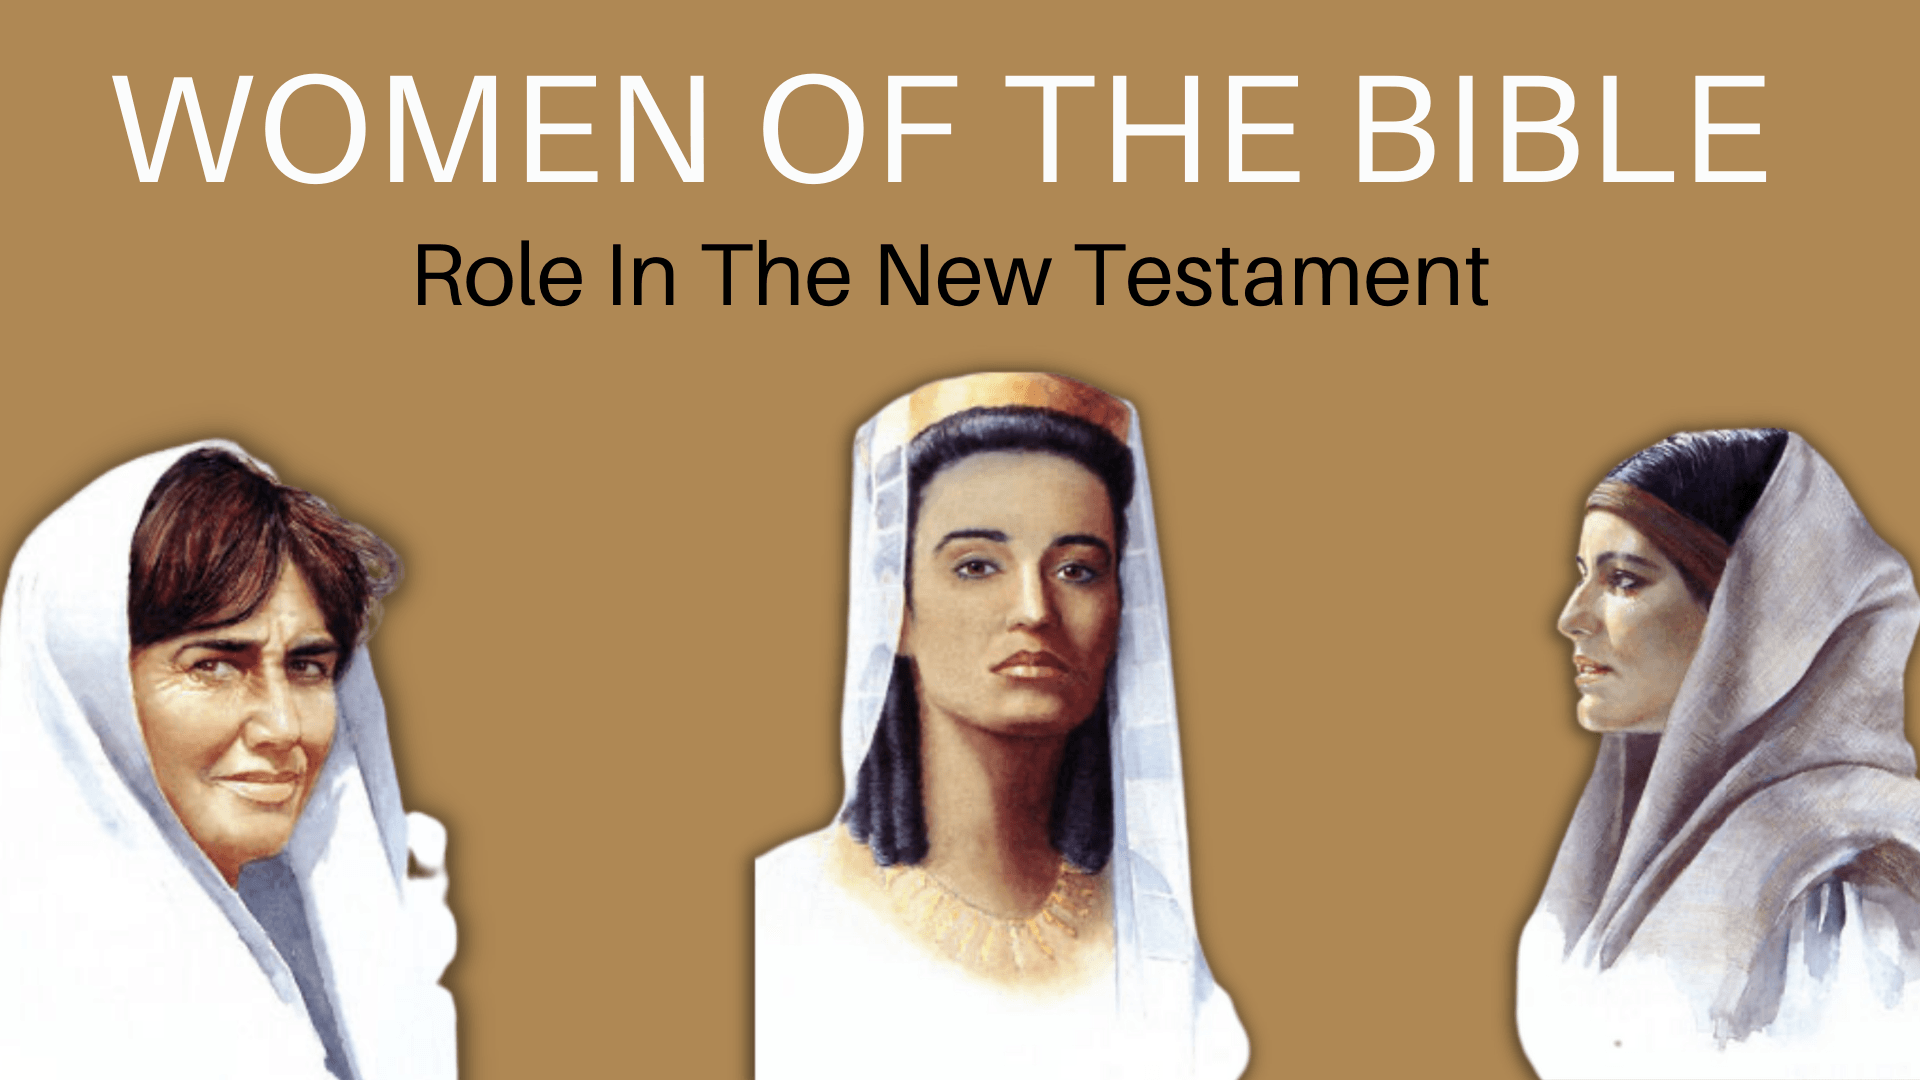 Women role in the new testament